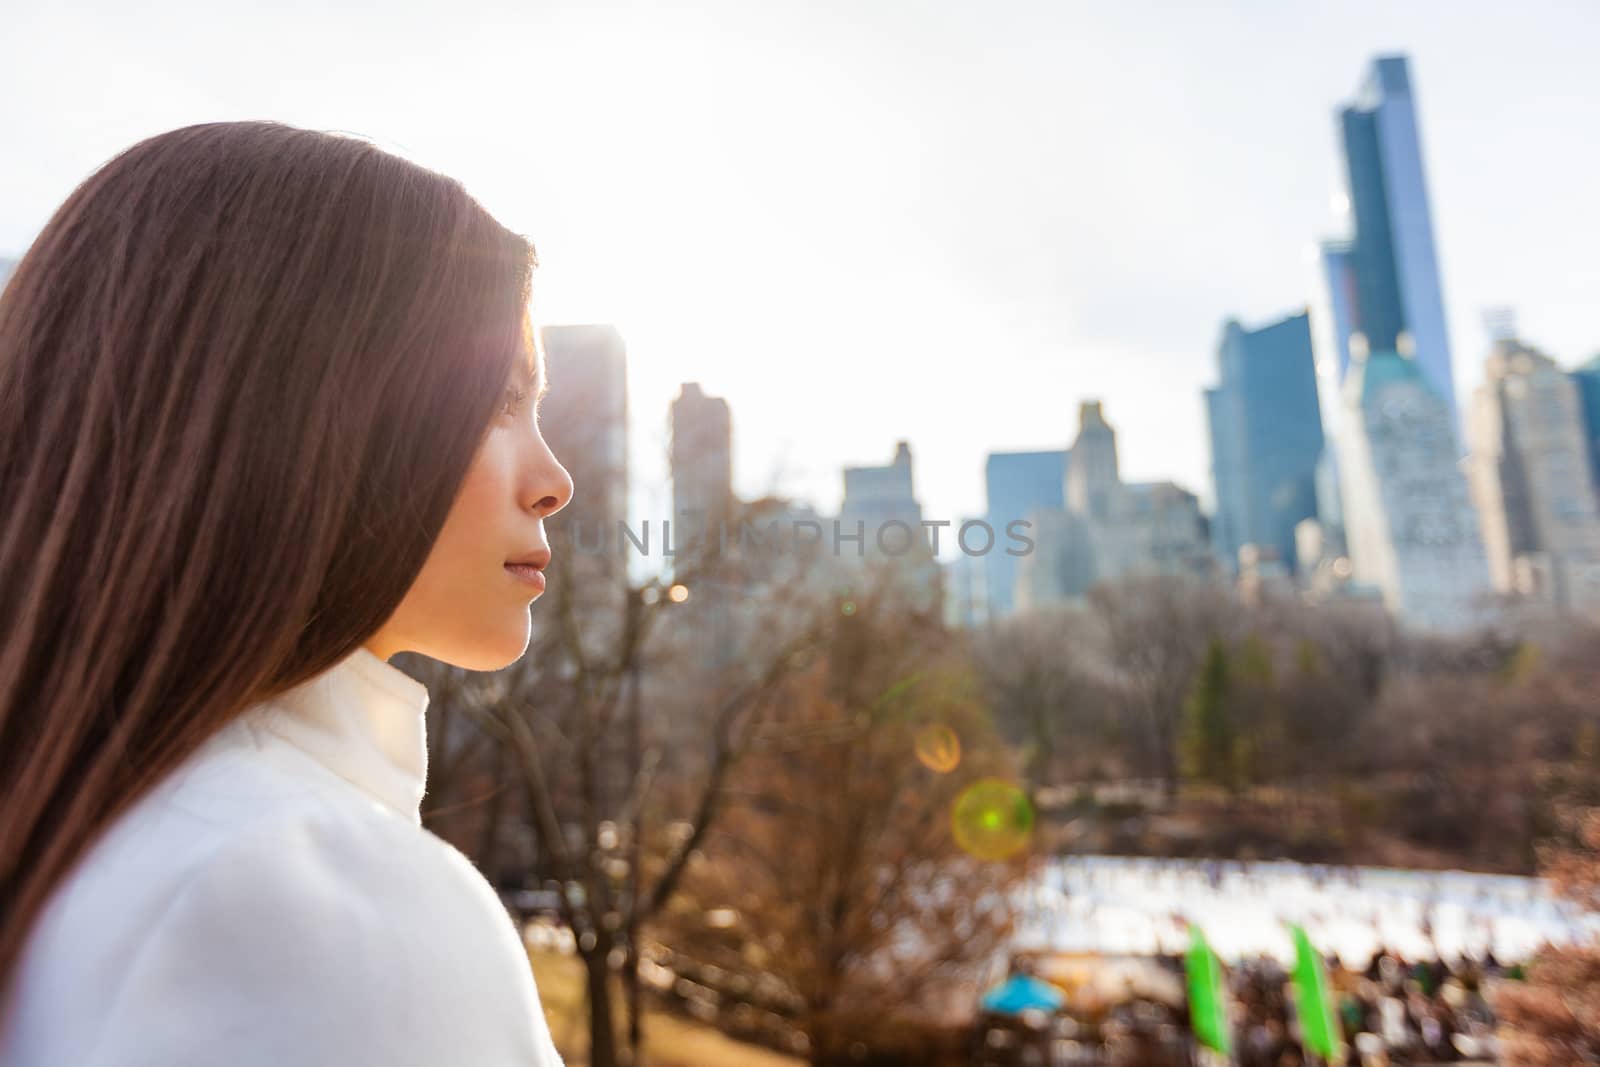 New York City Asian woman walking in winter in Central Park by the skating rink pensive looking at NYC skyline background. Urban city lifestyle living people outdoor by Maridav